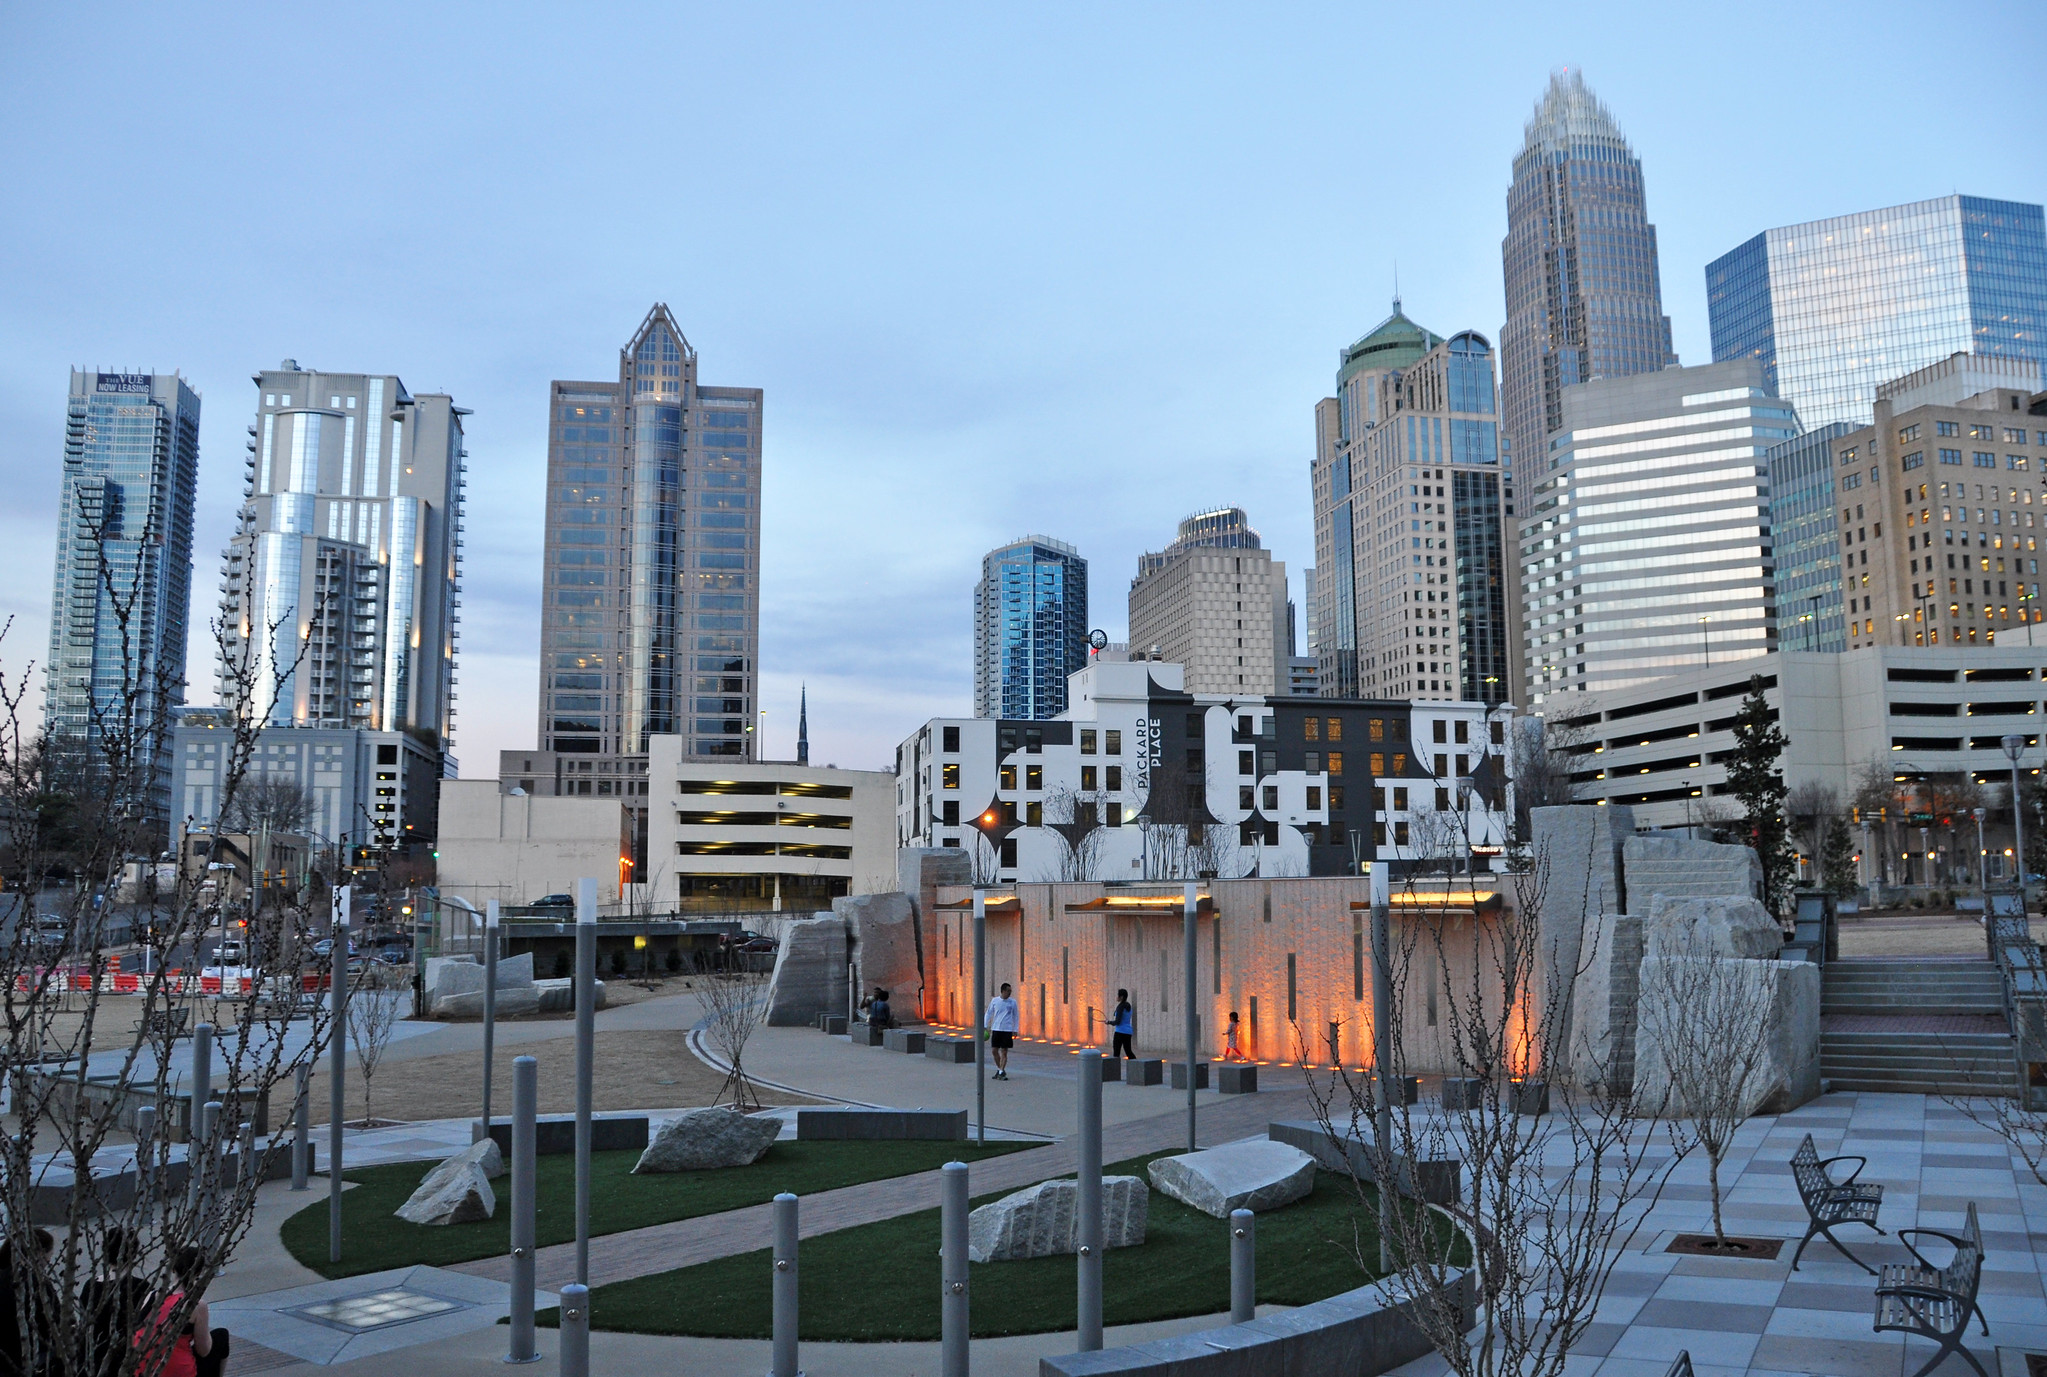 Charlotte North Carolina: Cool Things To Do // Destinations